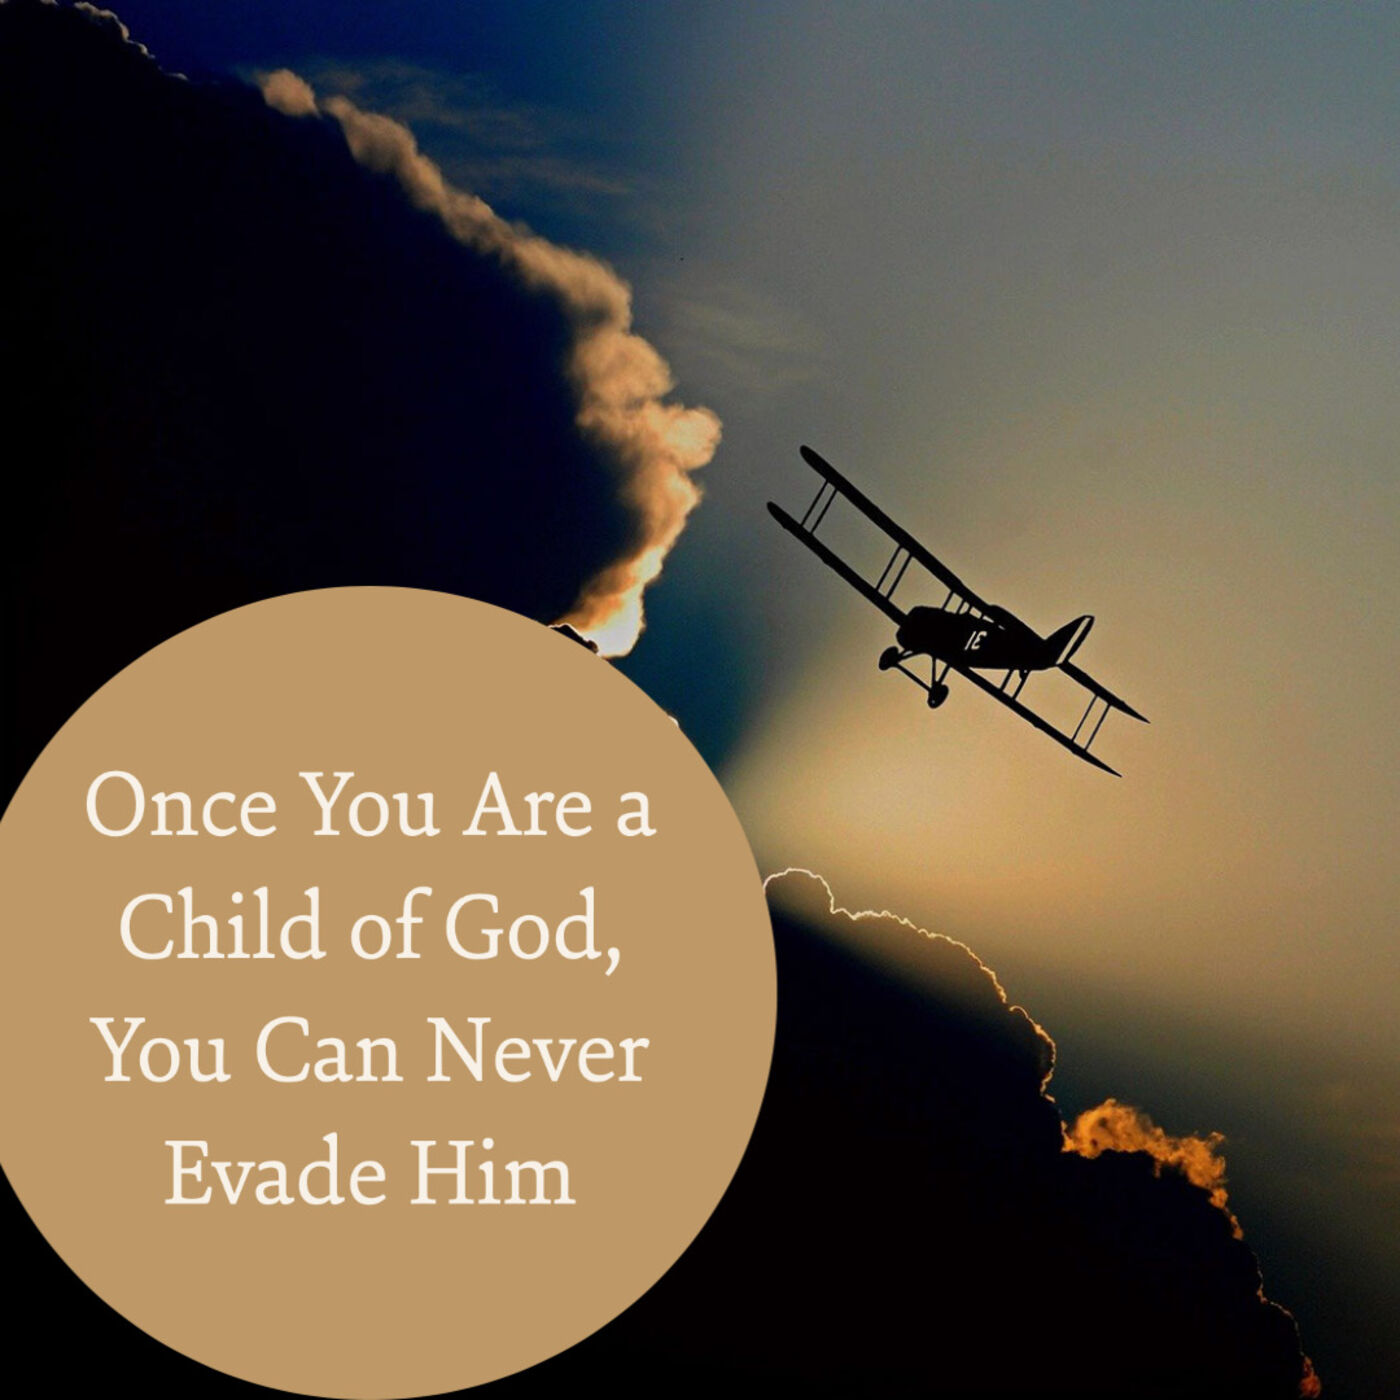 Once You Are a Child of God, You Can Never Evade Him